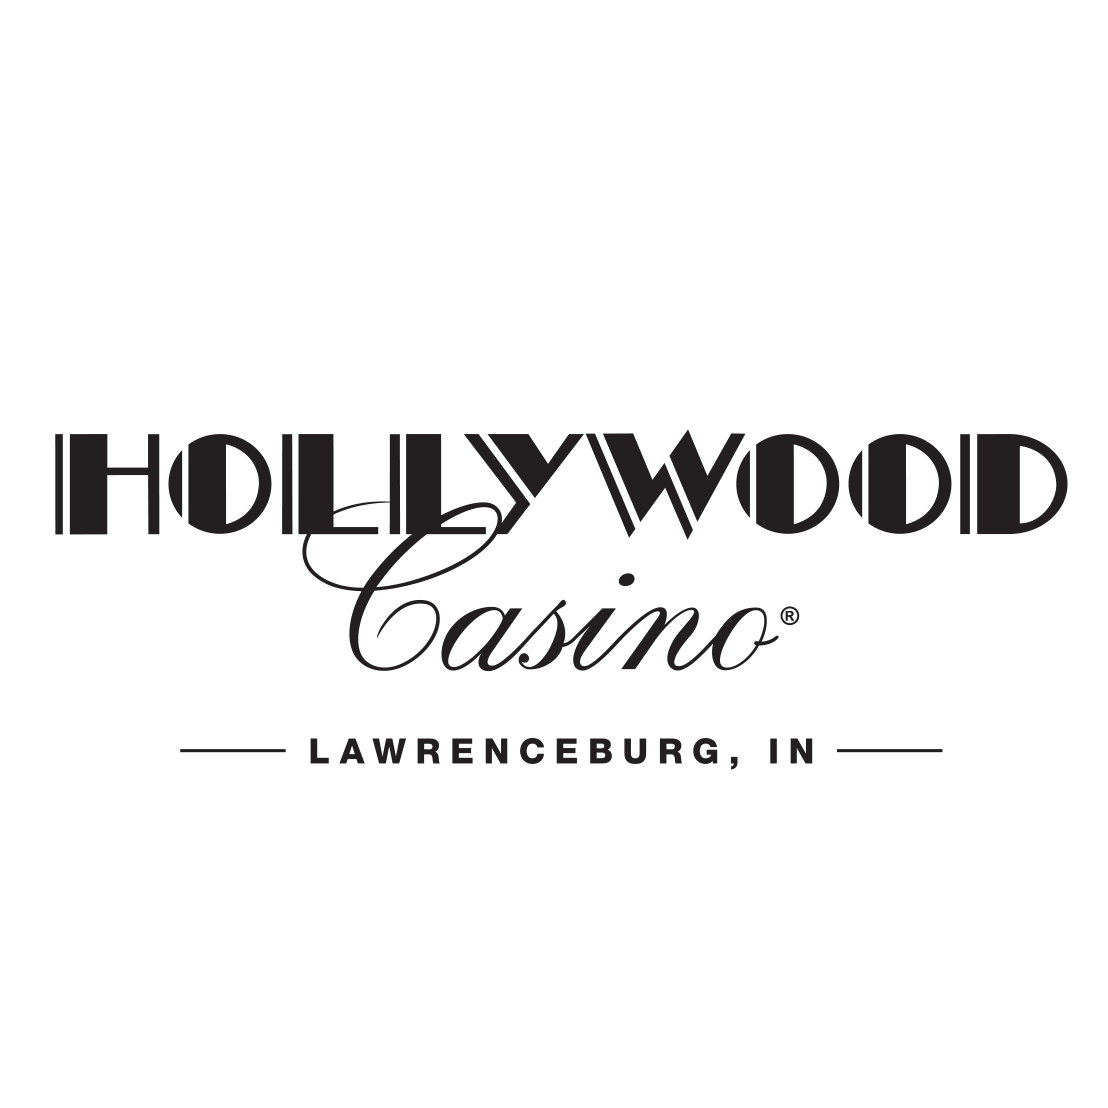 who owns hollywood casino in lawrenceburg indiana